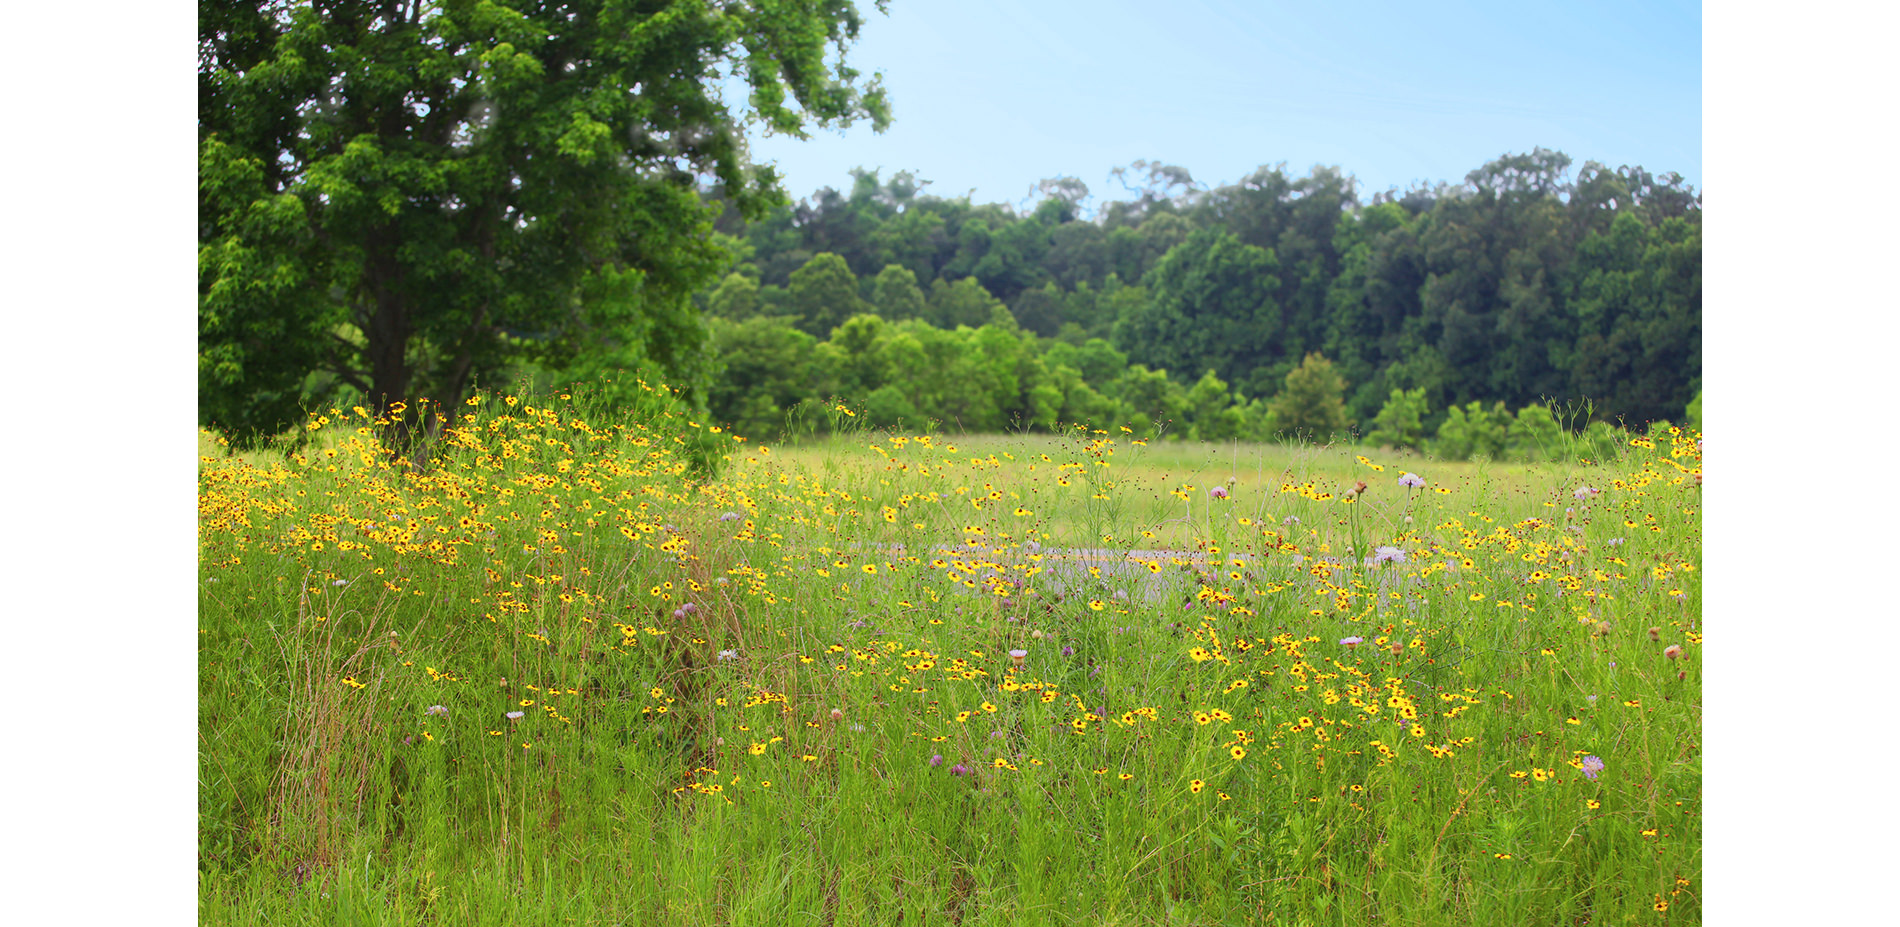 Wildflowers and Meadow Grasses